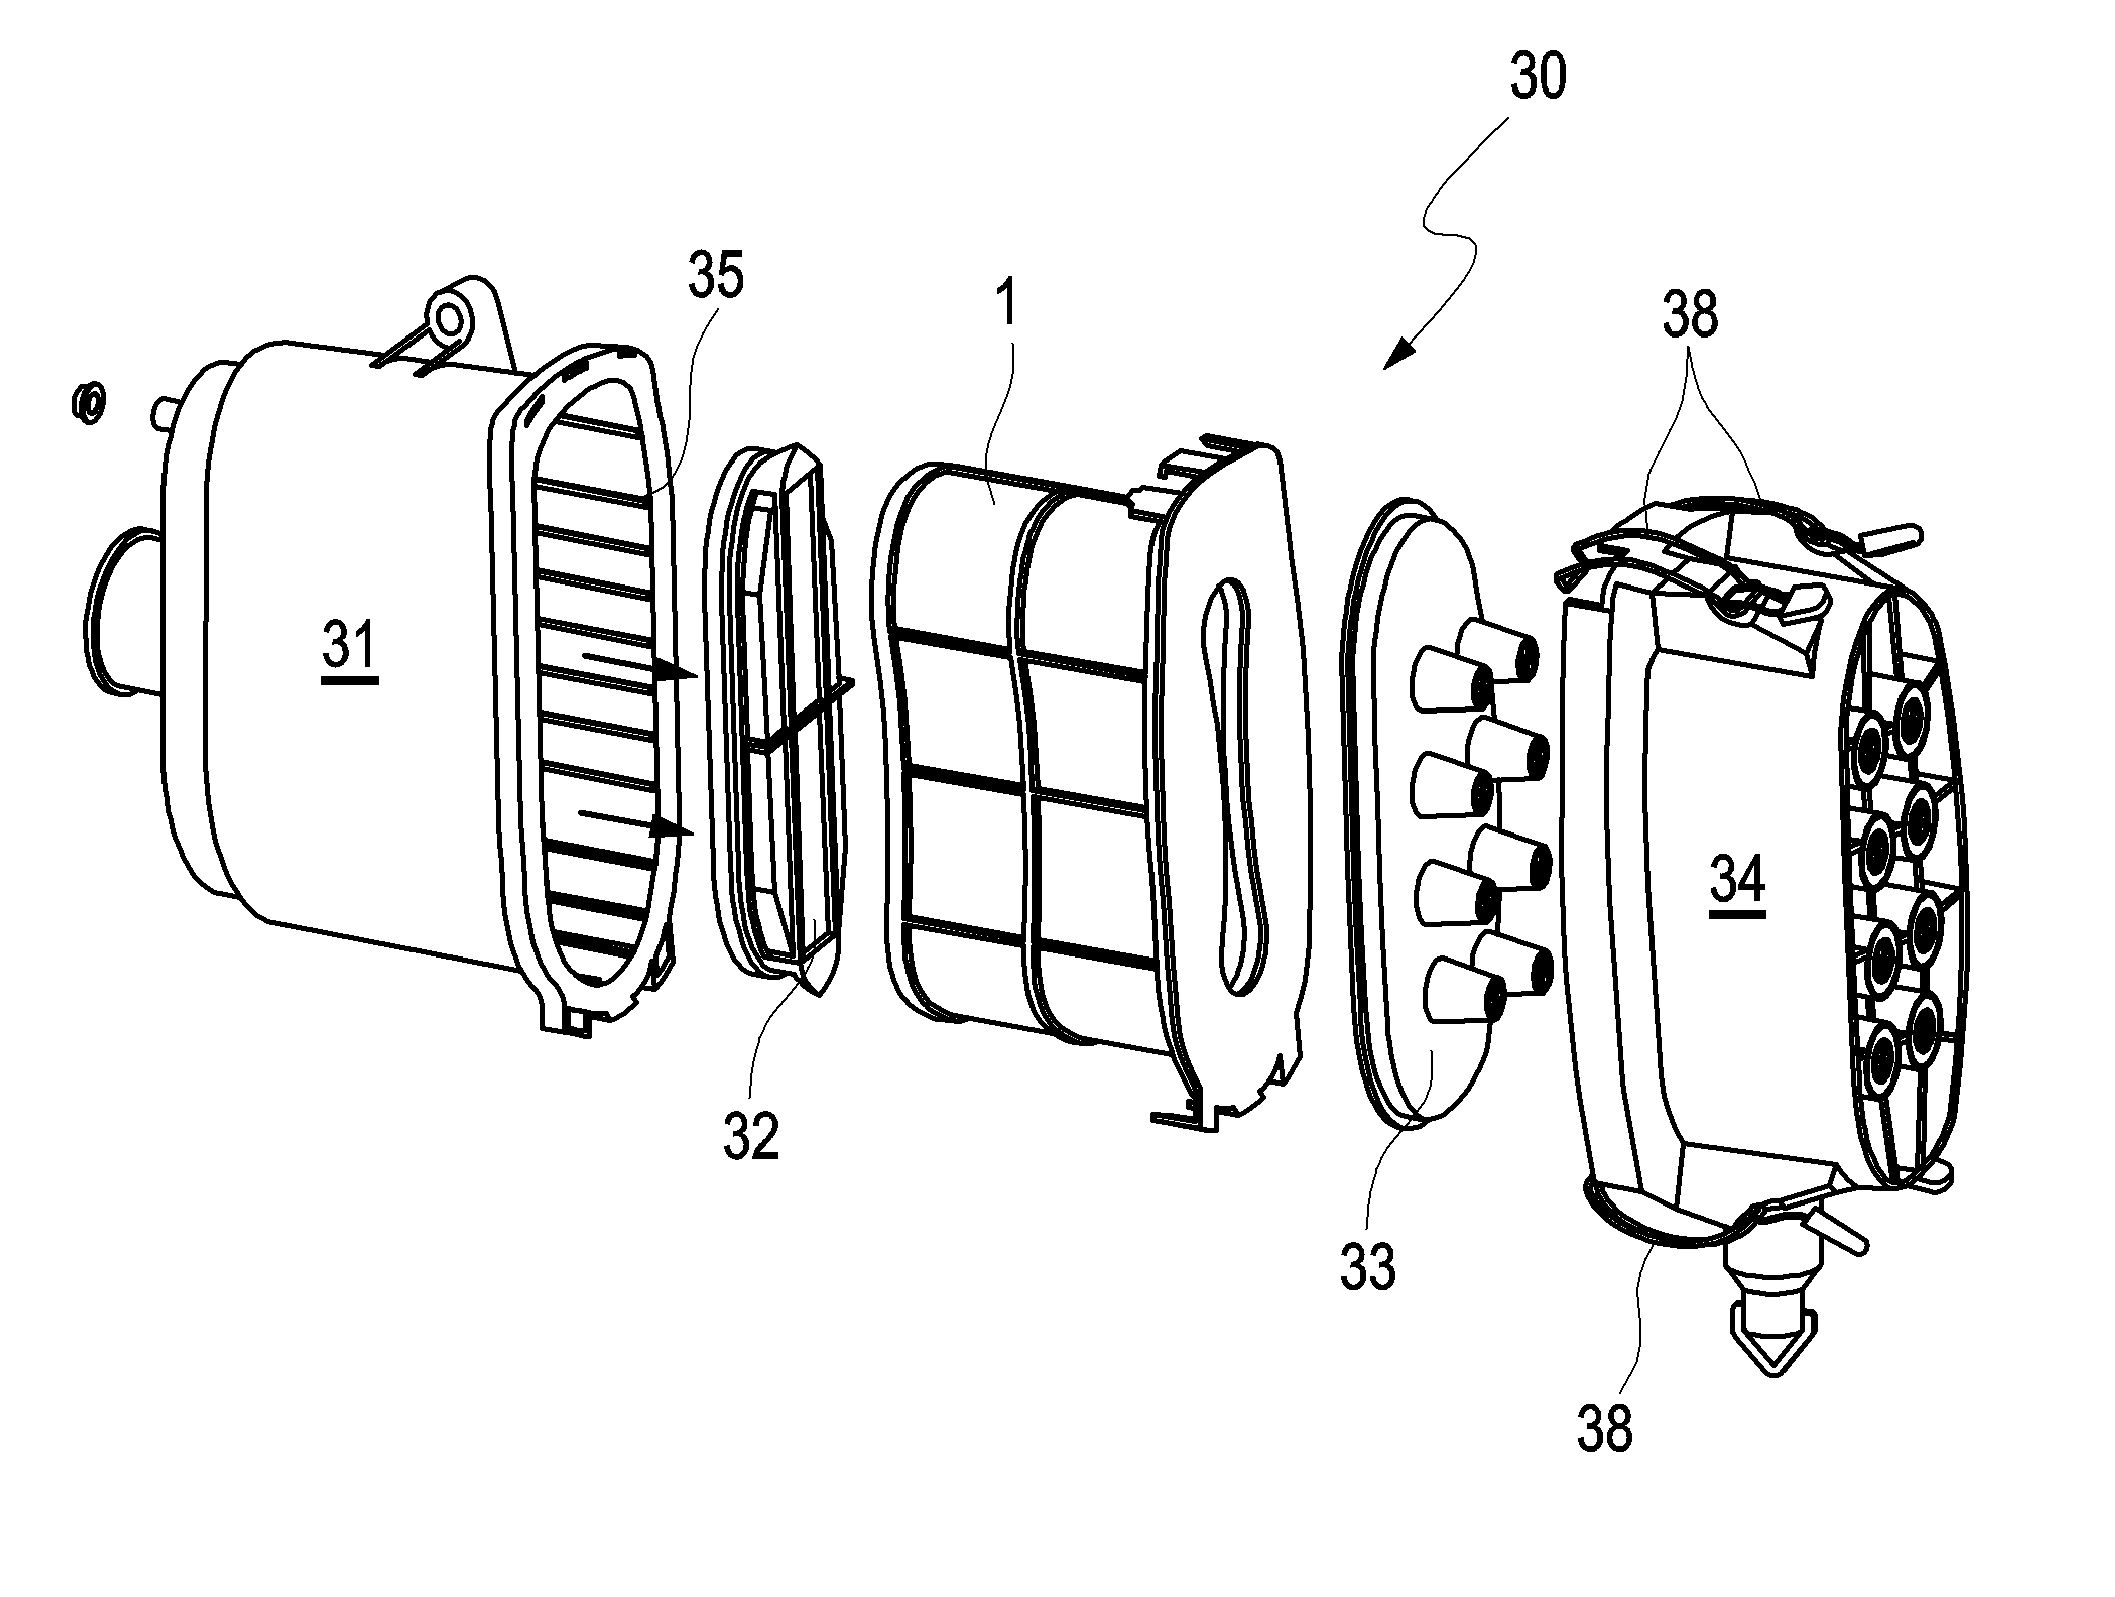 Air filter element, air filter housing and air filter system